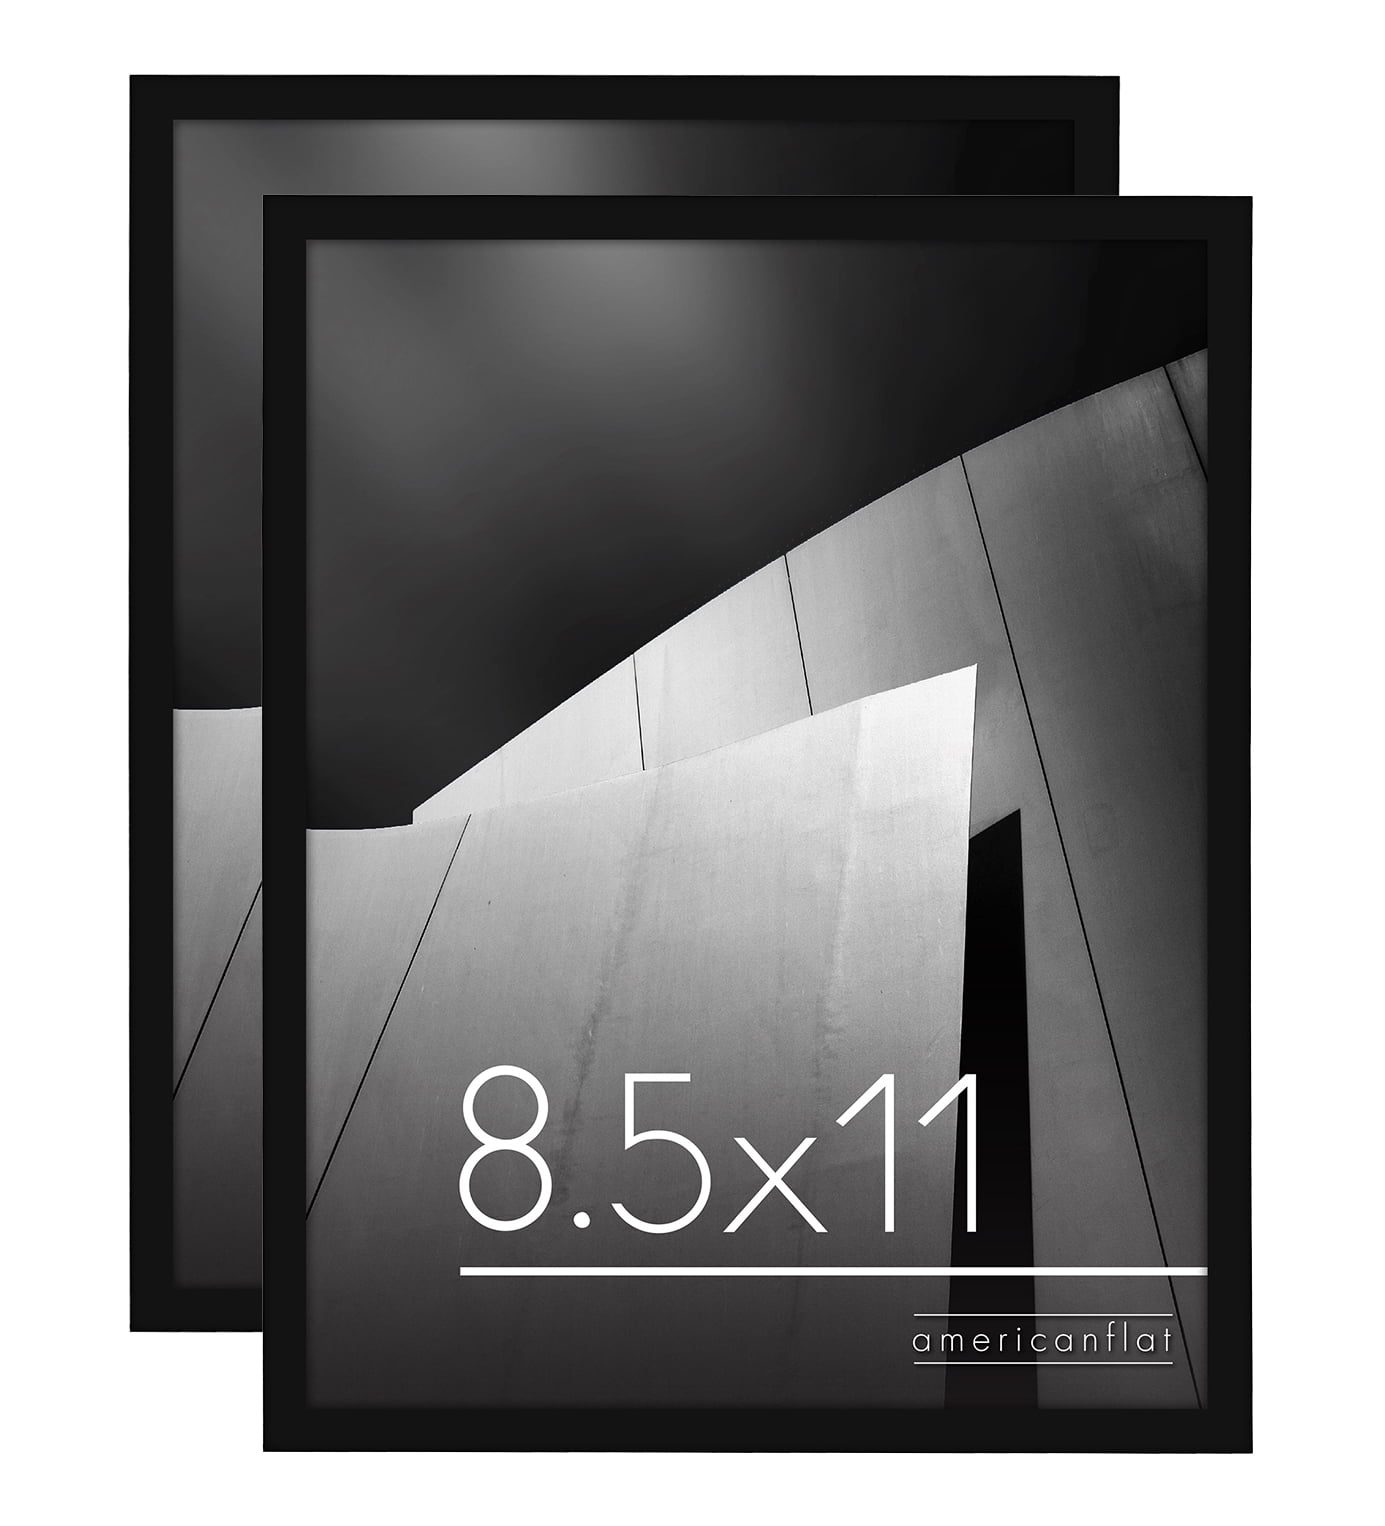 11x14 Black Floating Frames (Set of 2), Picture Frame Wall Mount or Tabletop Standing